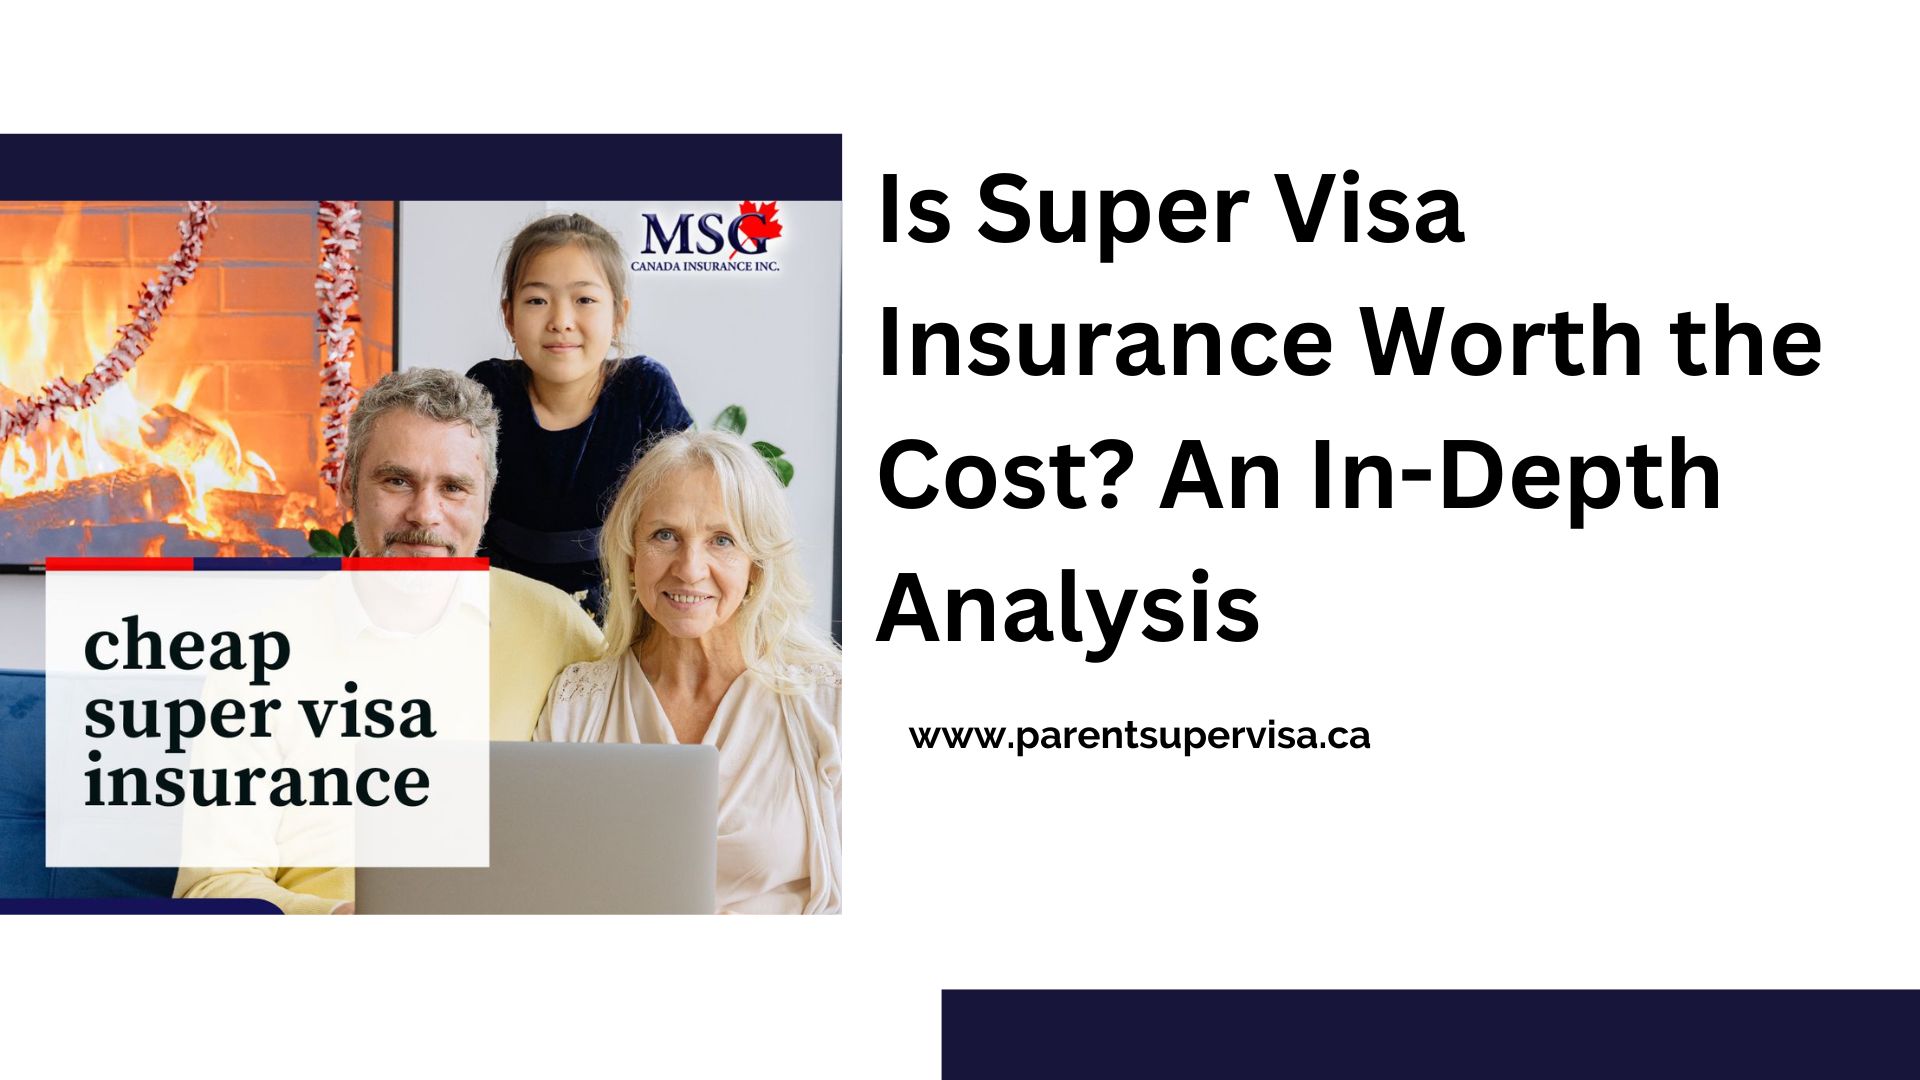 Is Super Visa Insurance Worth the Cost? An In-Depth Analysis